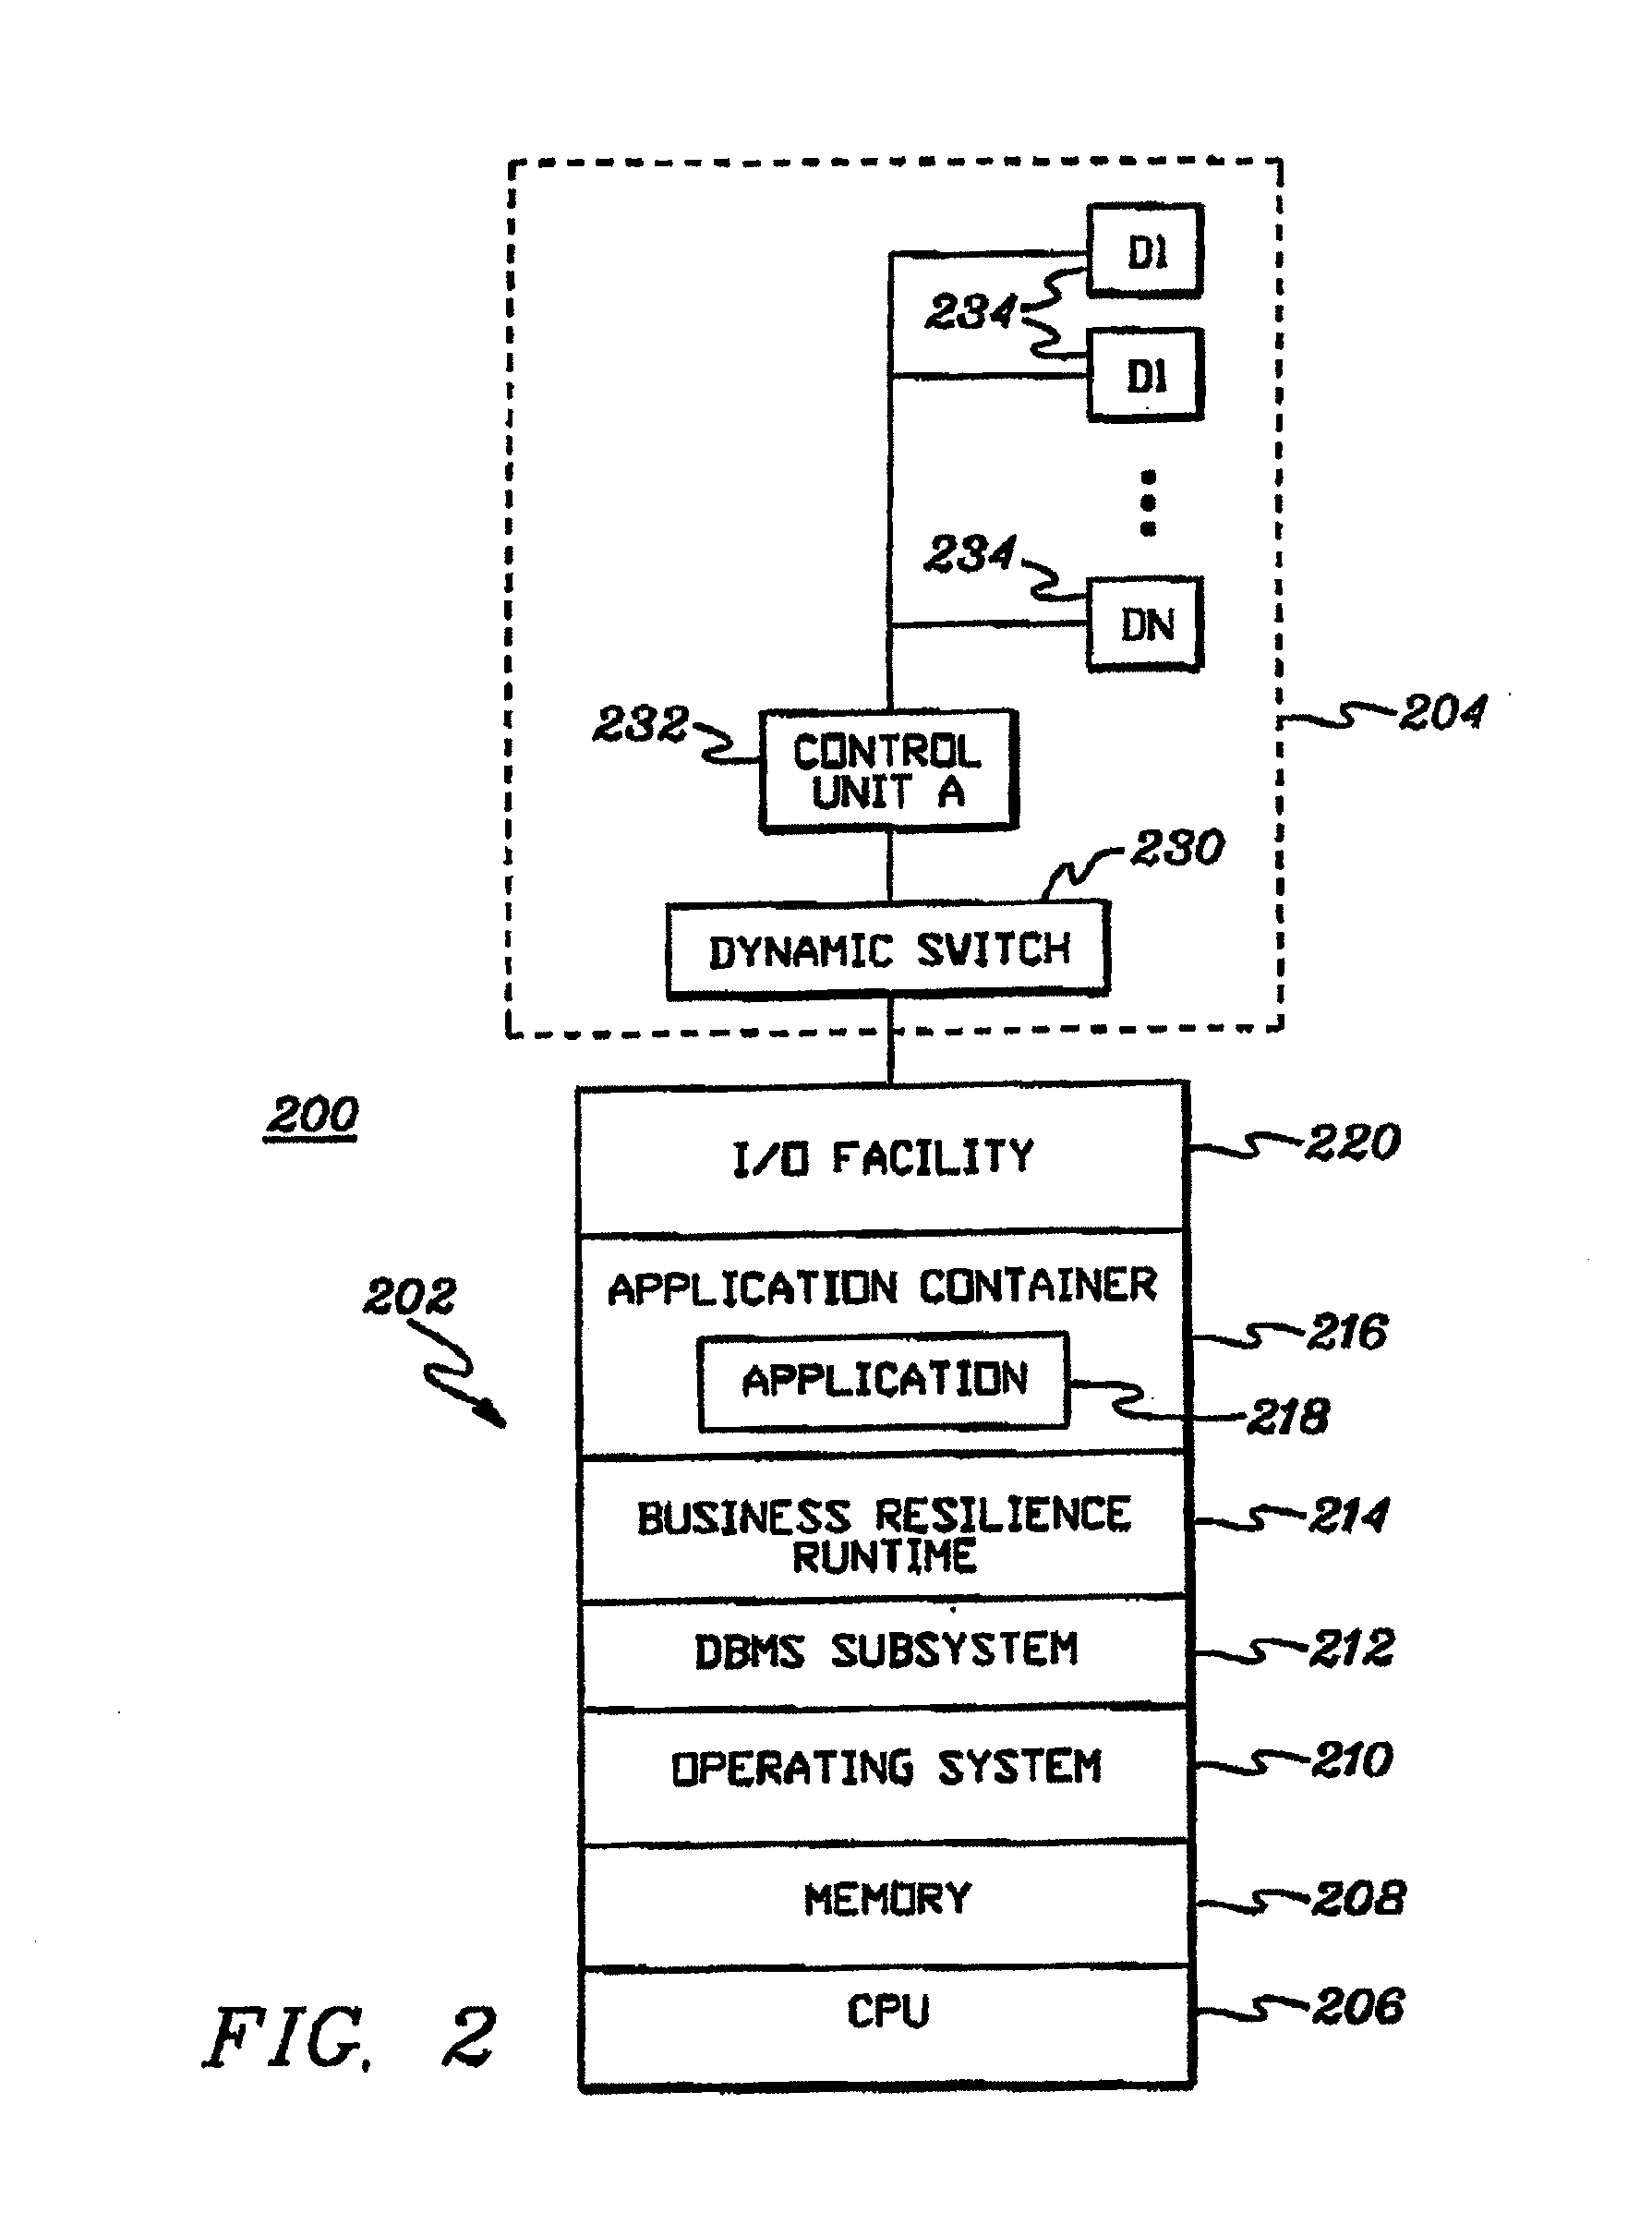 Adaptive computer sequencing of actions